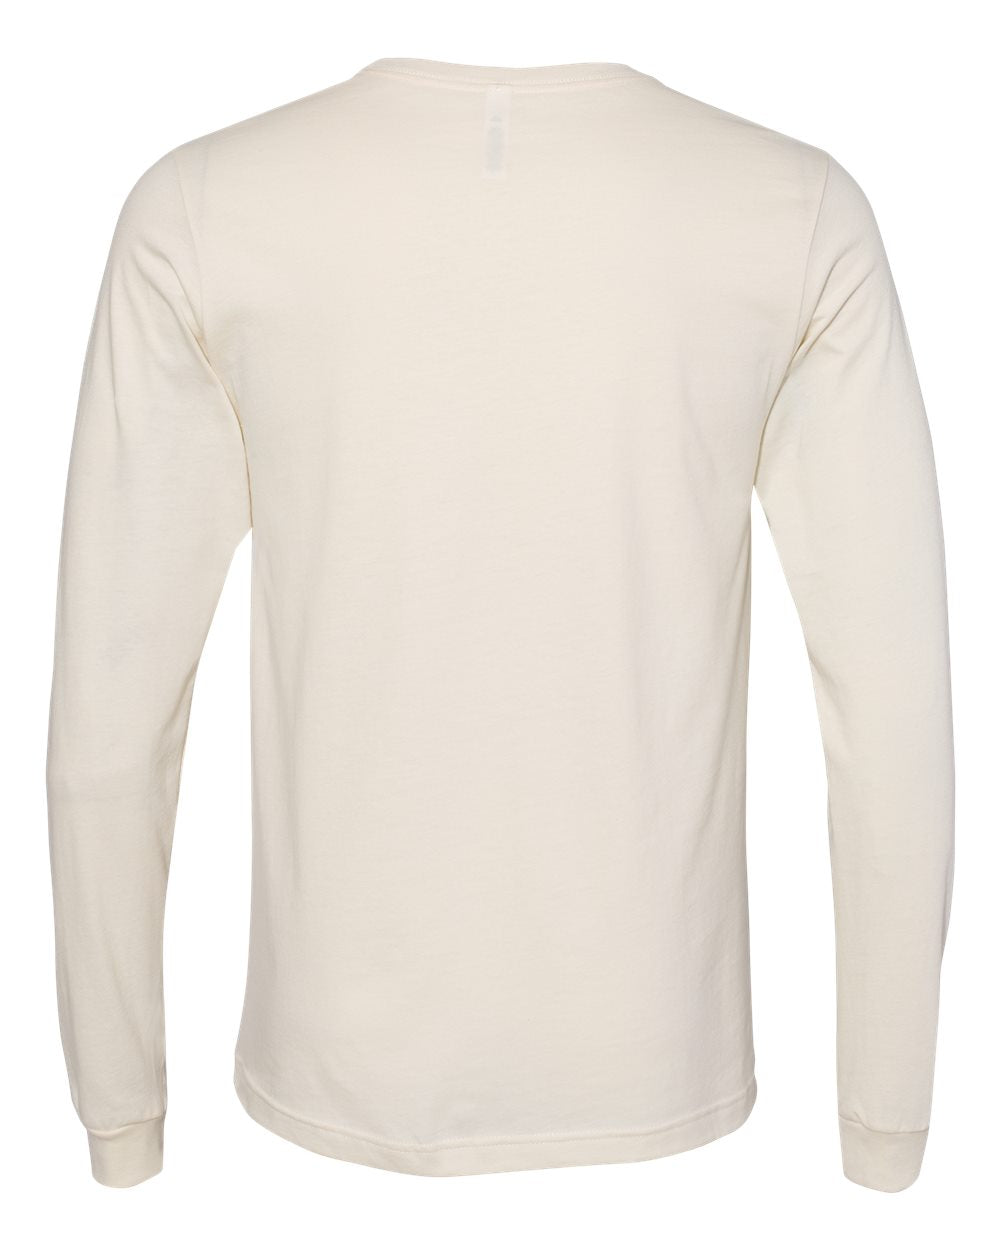 BELLA + CANVAS Unisex Jersey Long Sleeve Tee 3501 #color_Natural